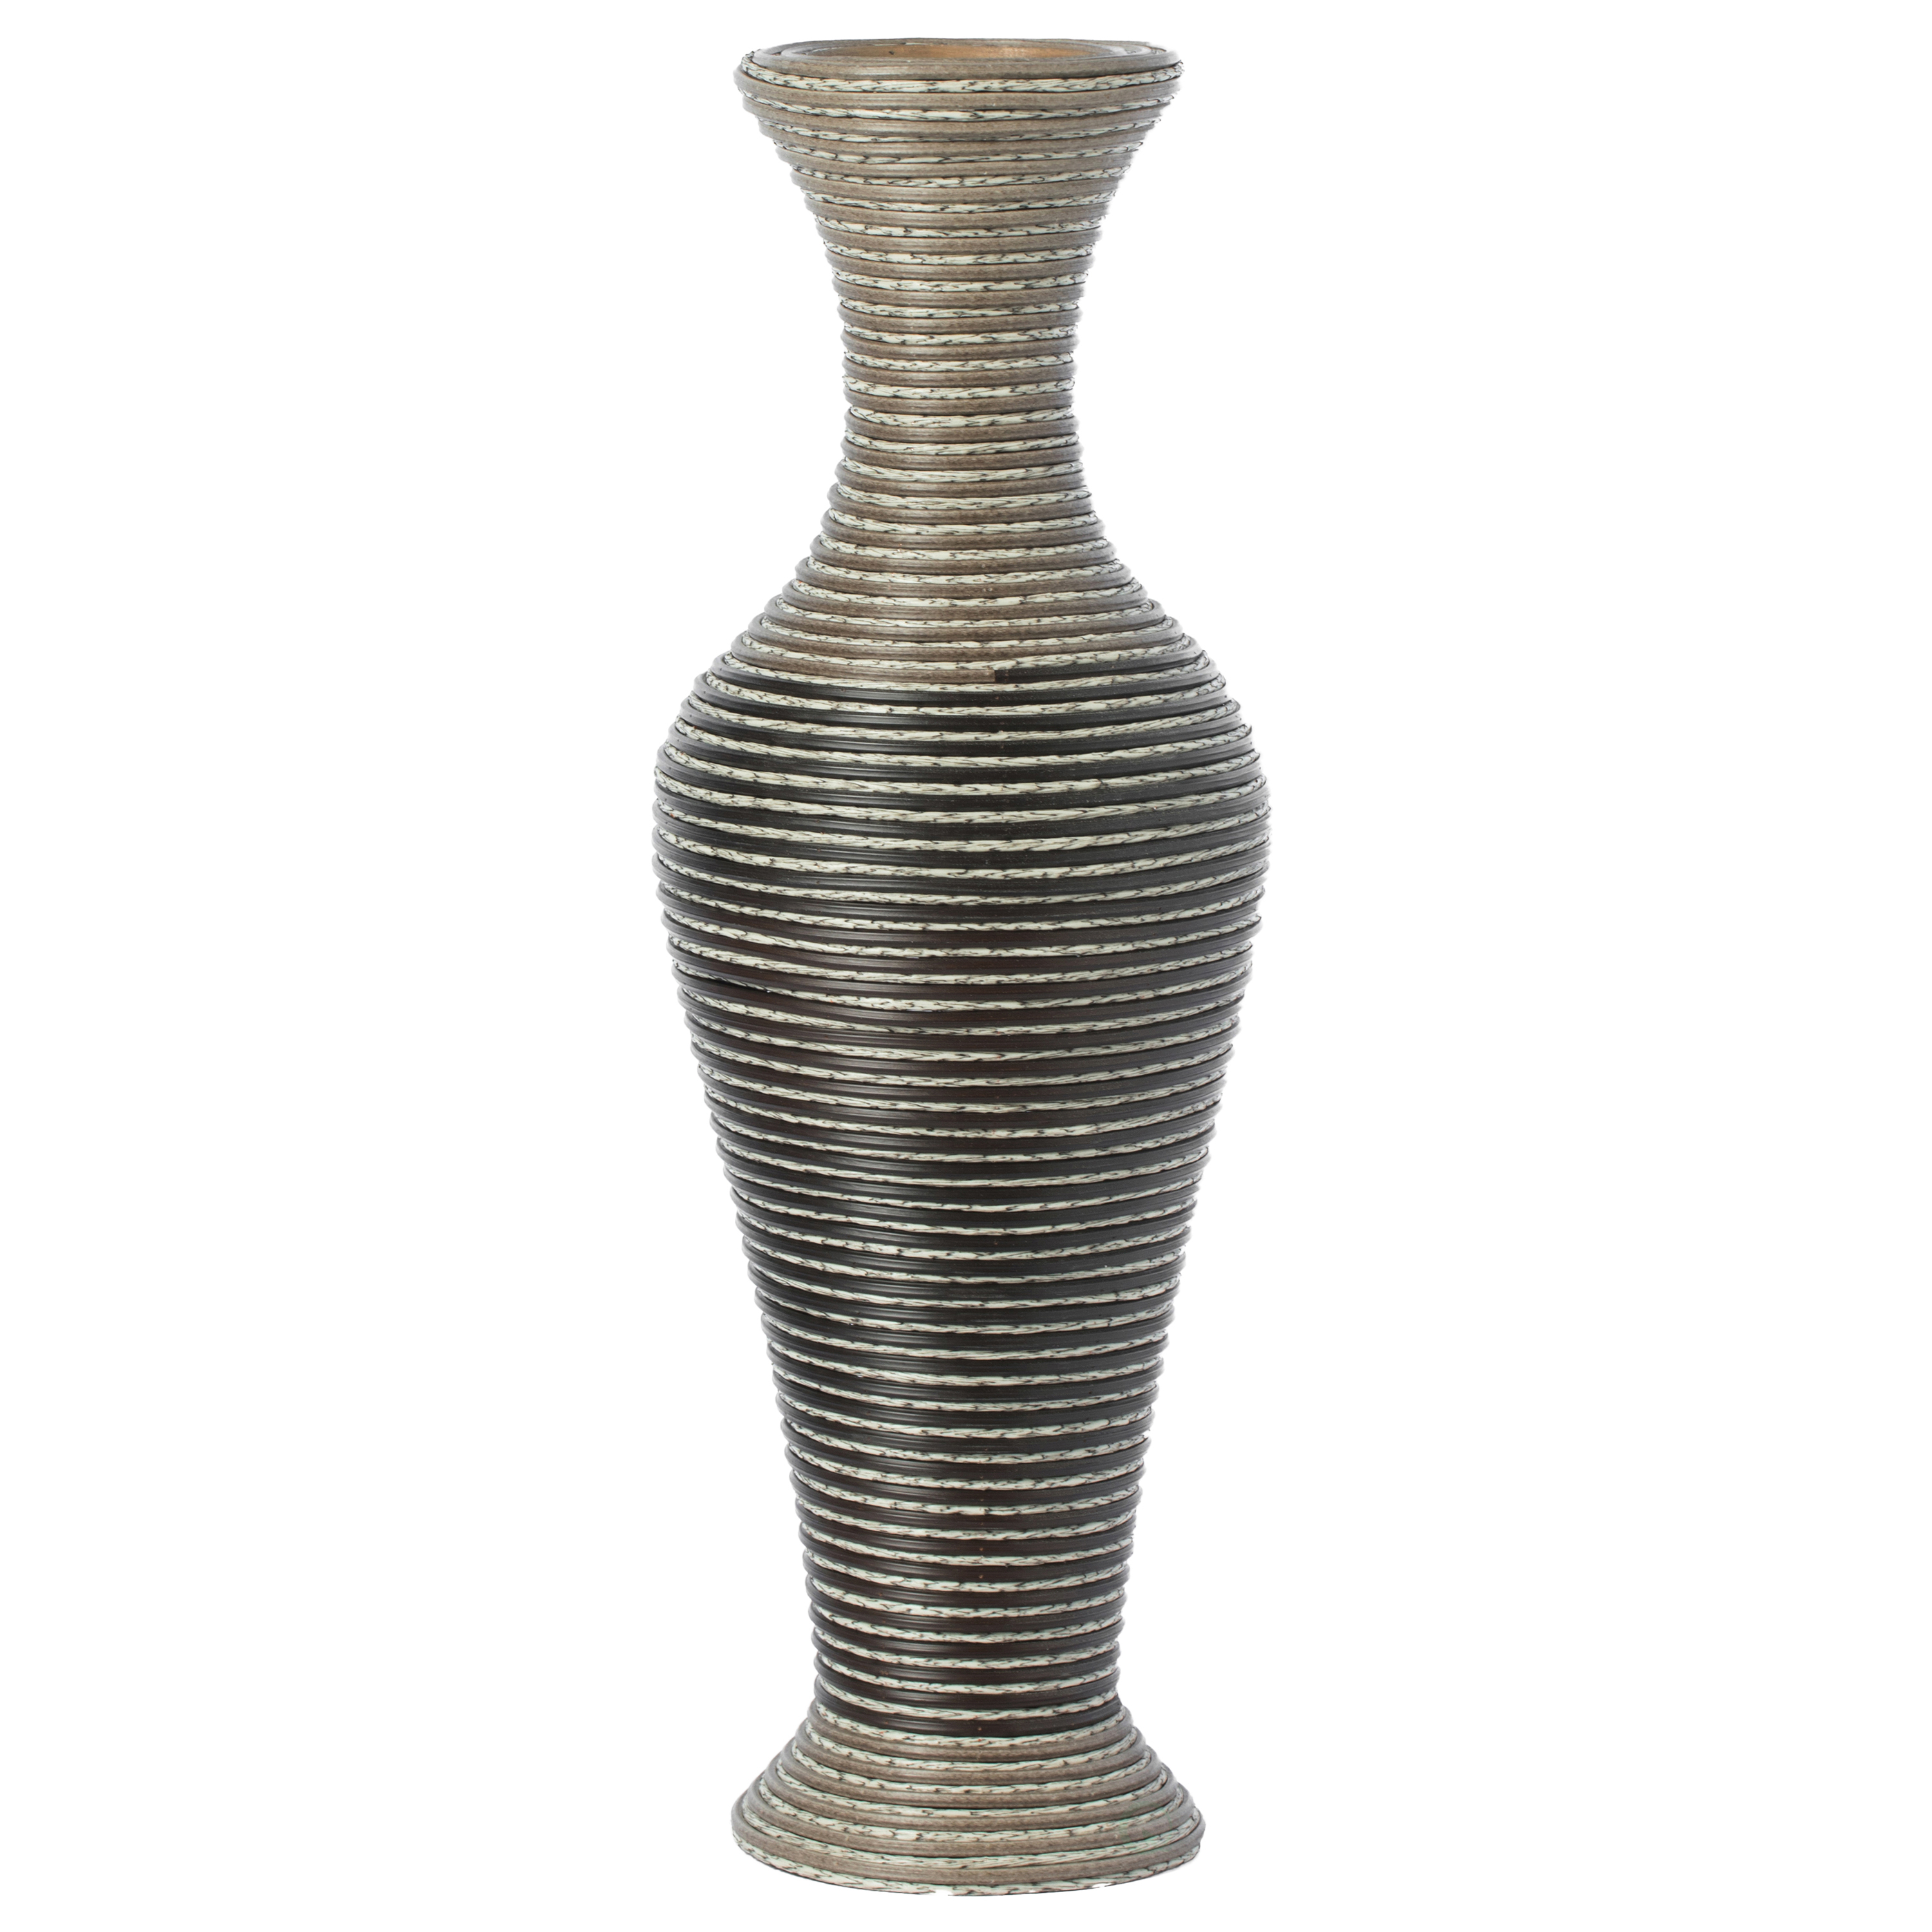 Artificial Rattan Weaved Wire Design Tabletop Accent Decorative Vase 23 Inch High